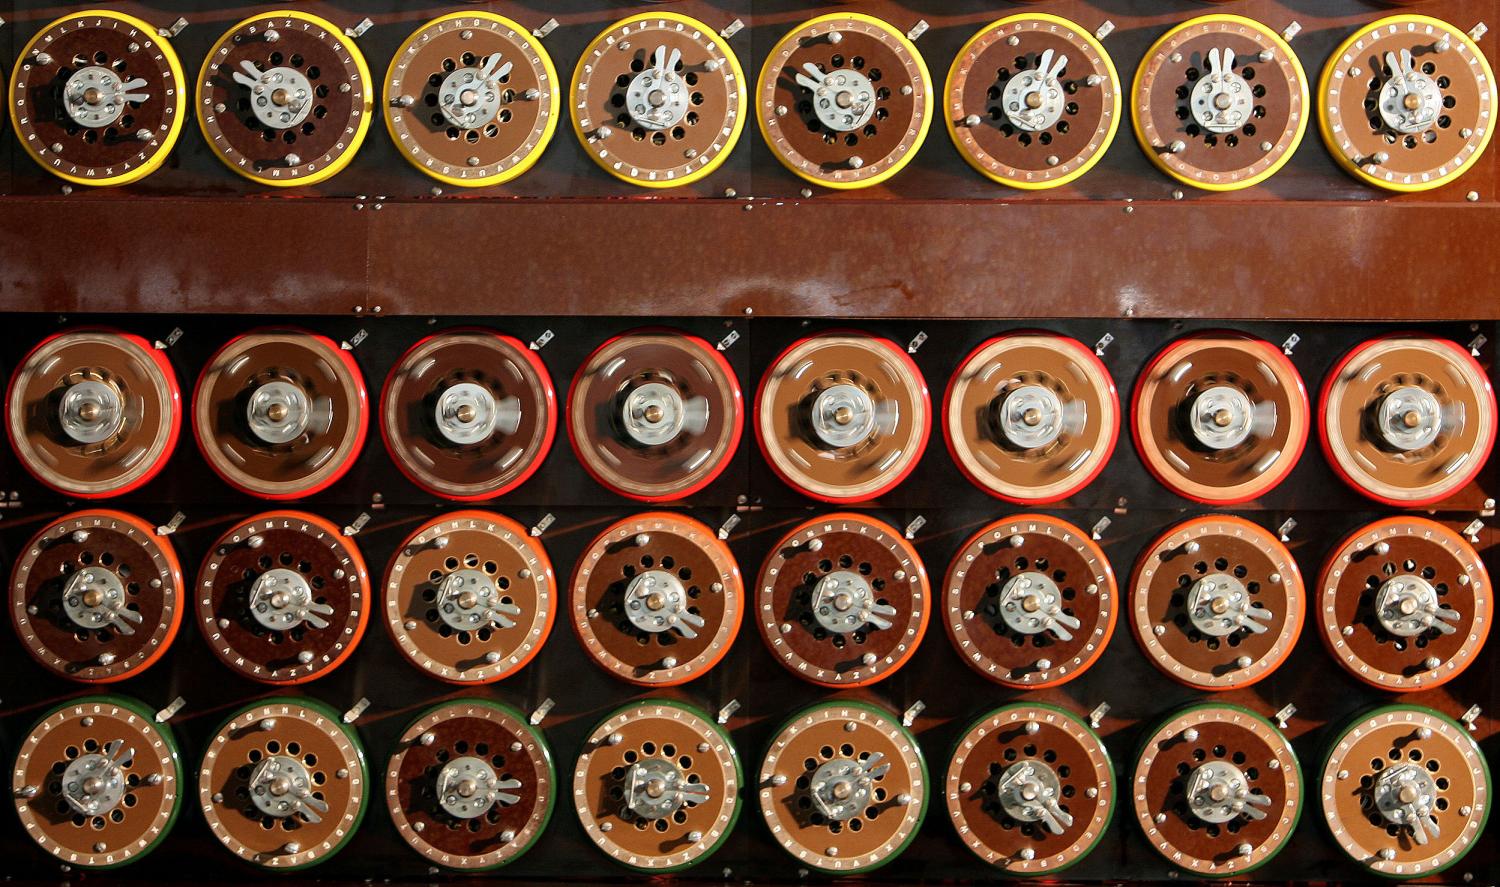 A British Turing Bombe machine is seen functioning in Bletchley Park Museum in Bletchley, central England, September 6, 2006. For the first time in sixty years Bletchley Park re-created the way the 'unbreakable' Enigma code was broken using functioning World War Two equipment. The Bombe was the brainchild of mathematical geniuses Alan Turing and Gordon Welchman, and enabled Bletchley Park's Cryptographers to decode over 3000 enemy messages a day breaking the codes created by German military Enigma machine during World War Two.   REUTERS/Alessia Pierdomenico (BRITAIN)